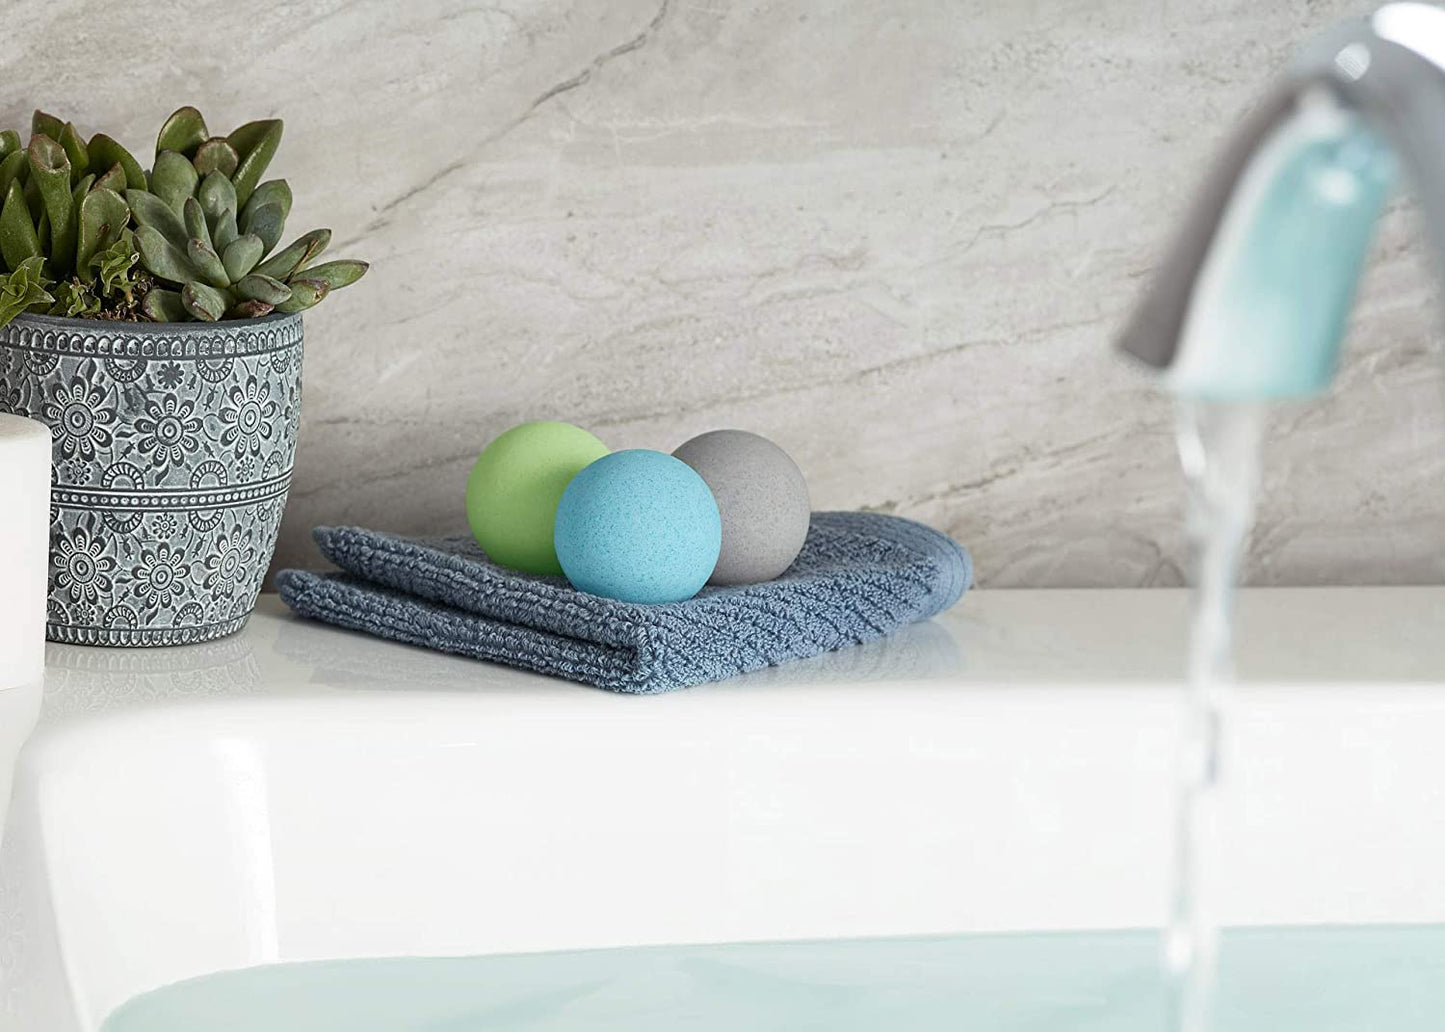 Three different colored bath bombs for men resting on a towel on the edge of a bathtub.